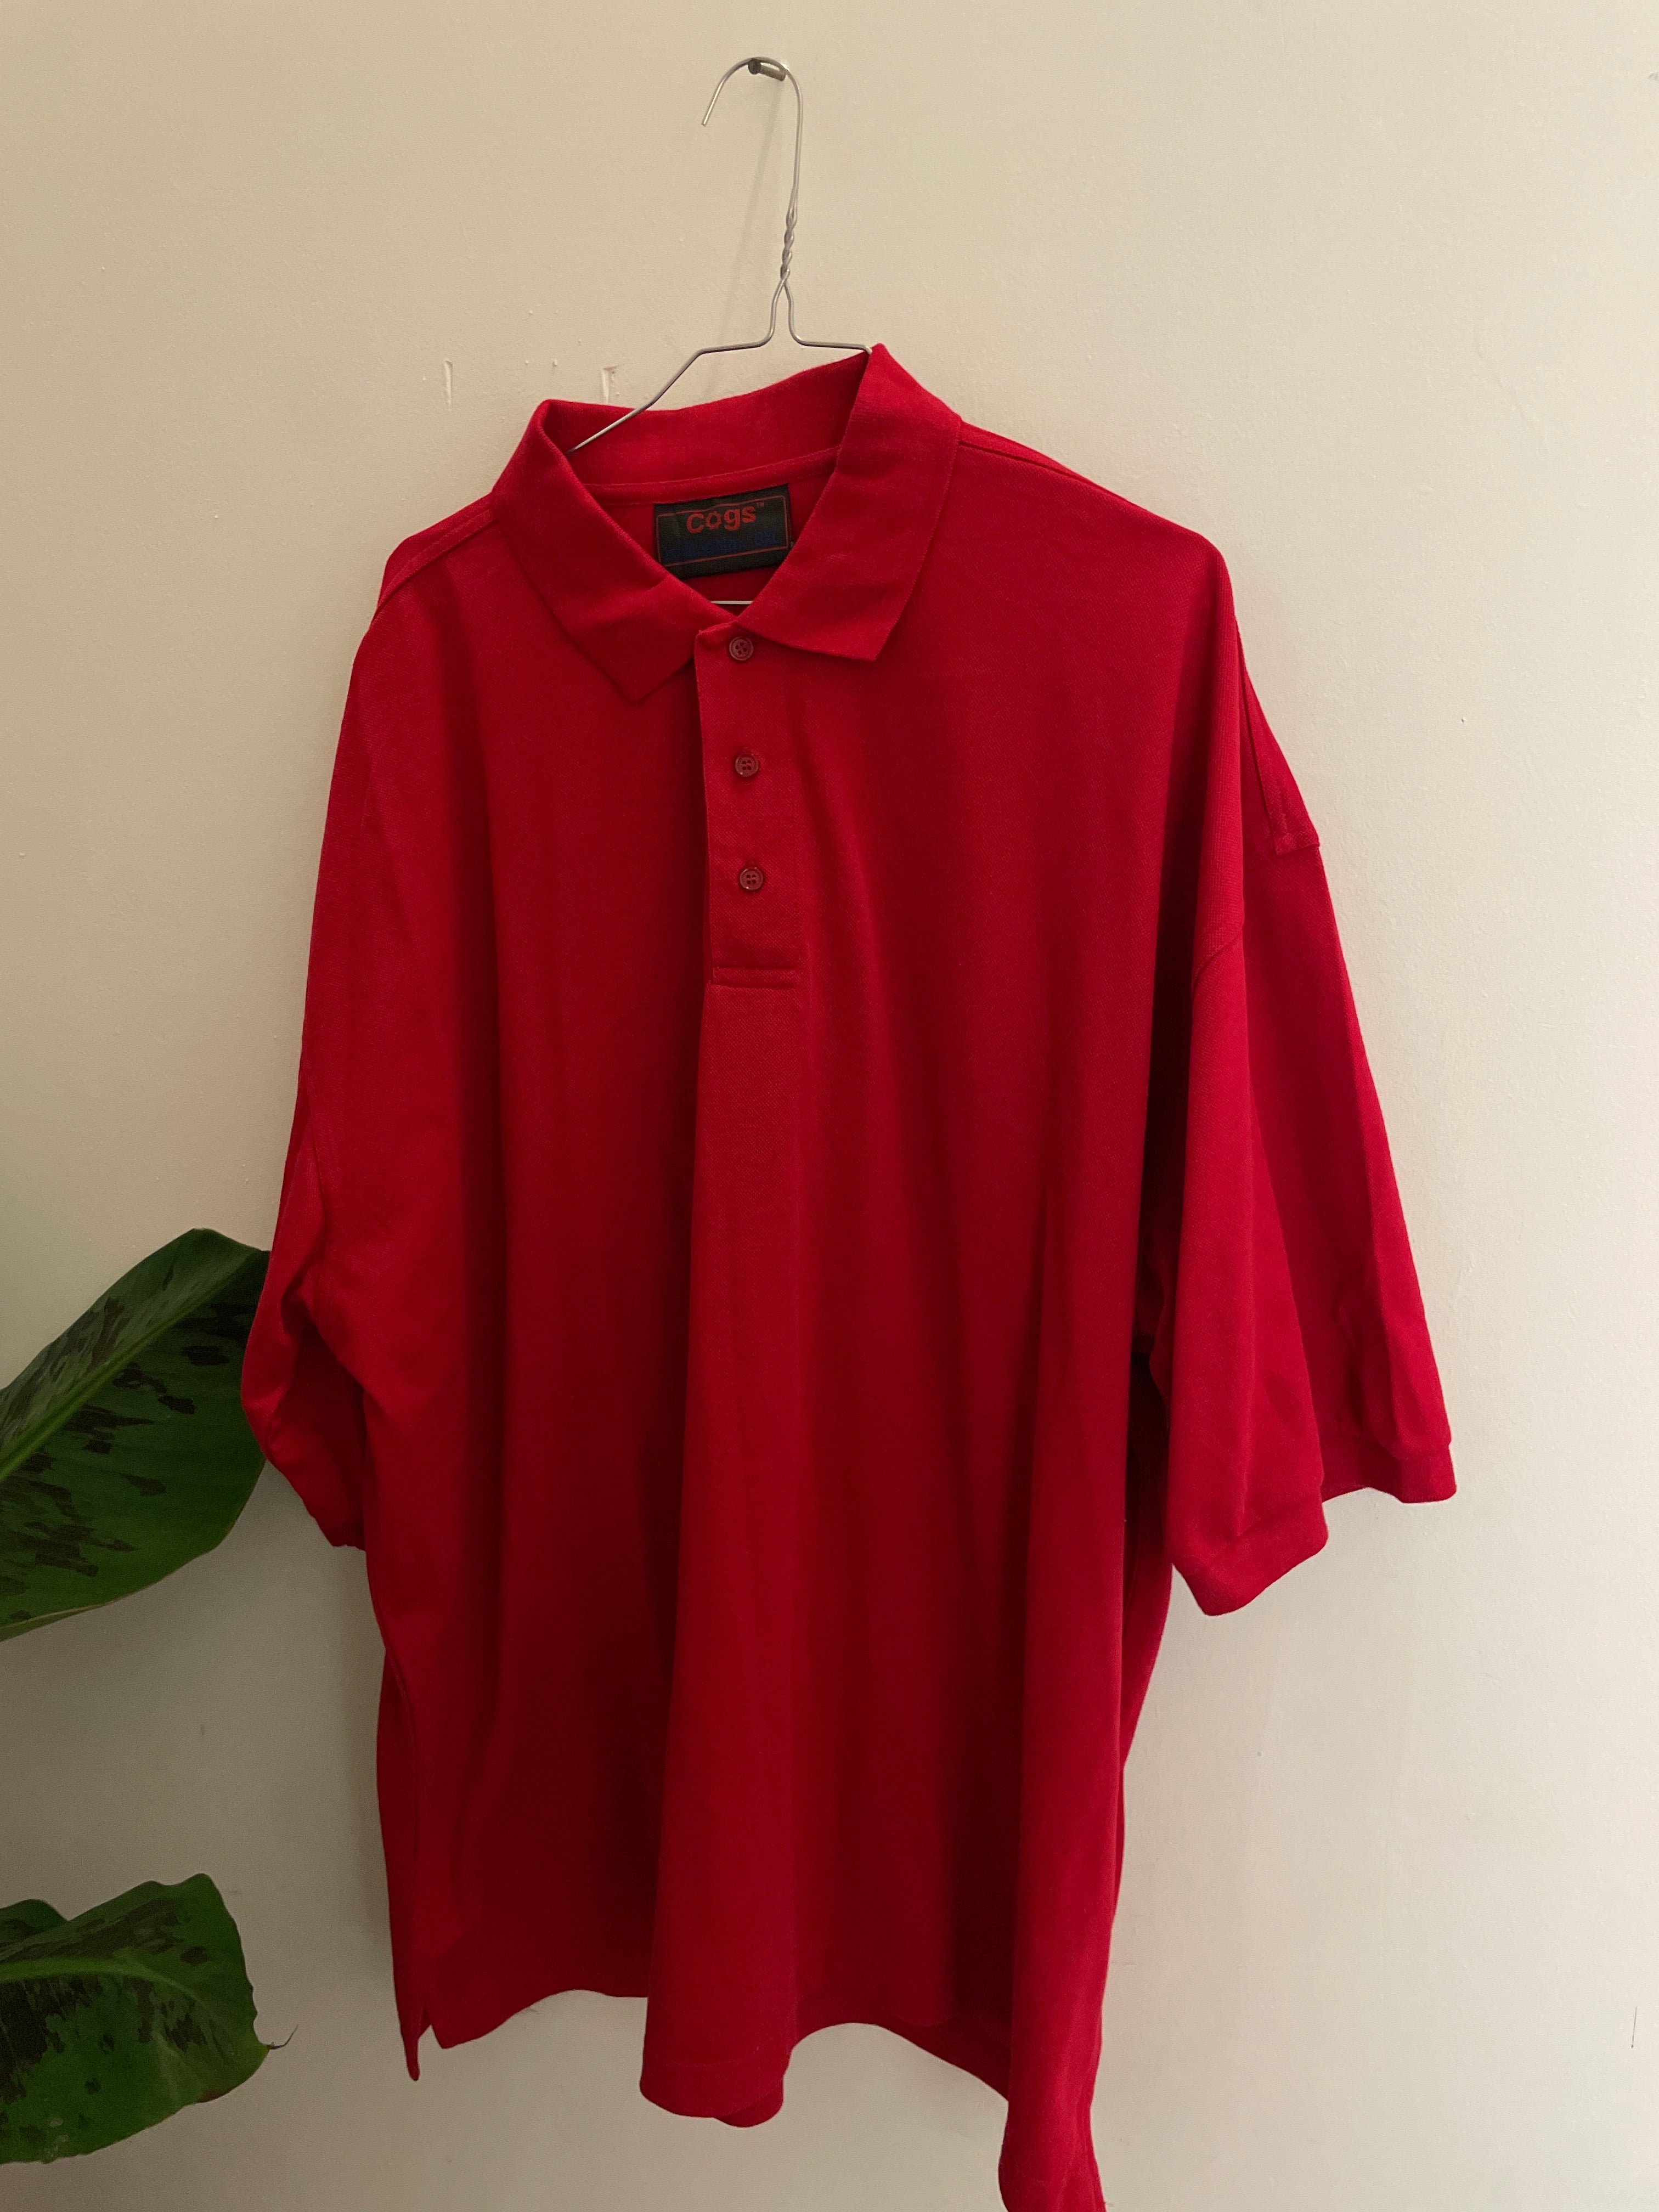 Vintage Cogs by bluemax red mens polo shirt size XXXL